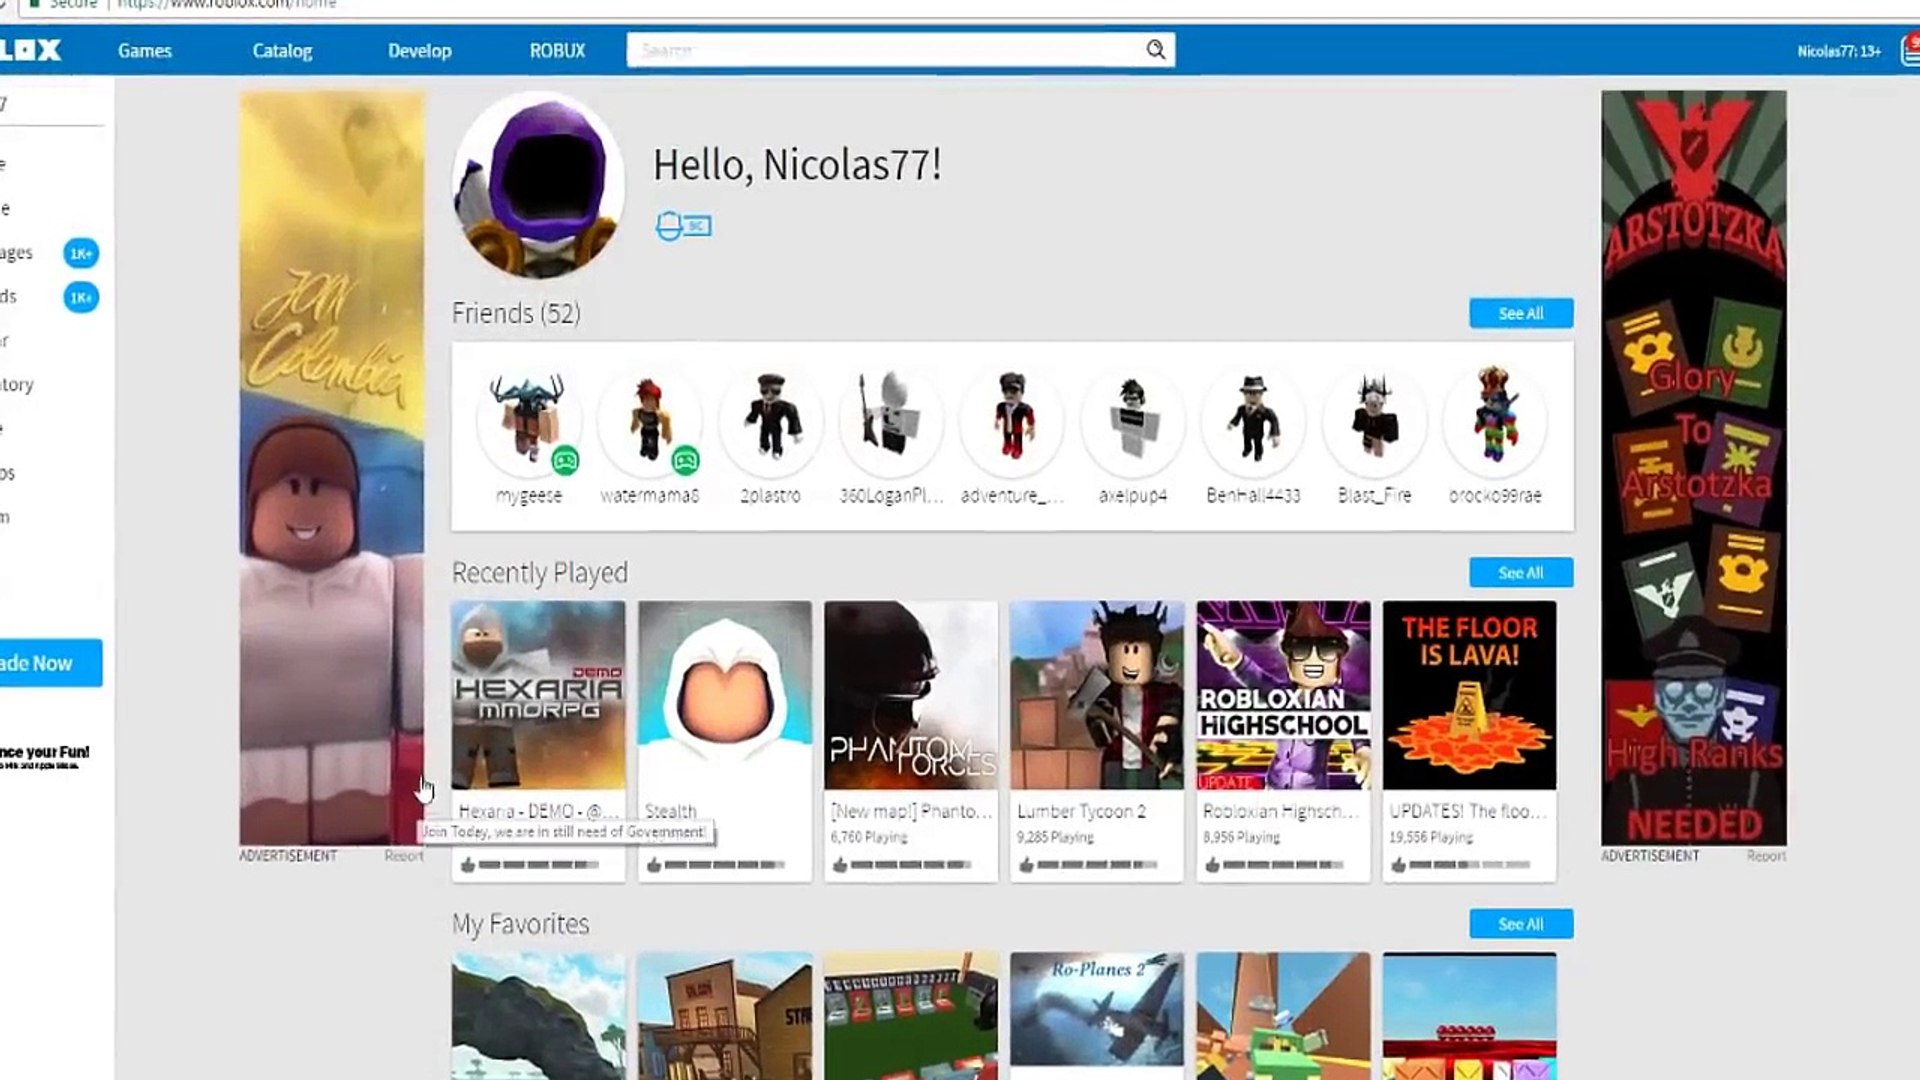 3 Roblox Games That Give Free Robux Video Dailymotion - how to get 99999 robux on roblox 2017